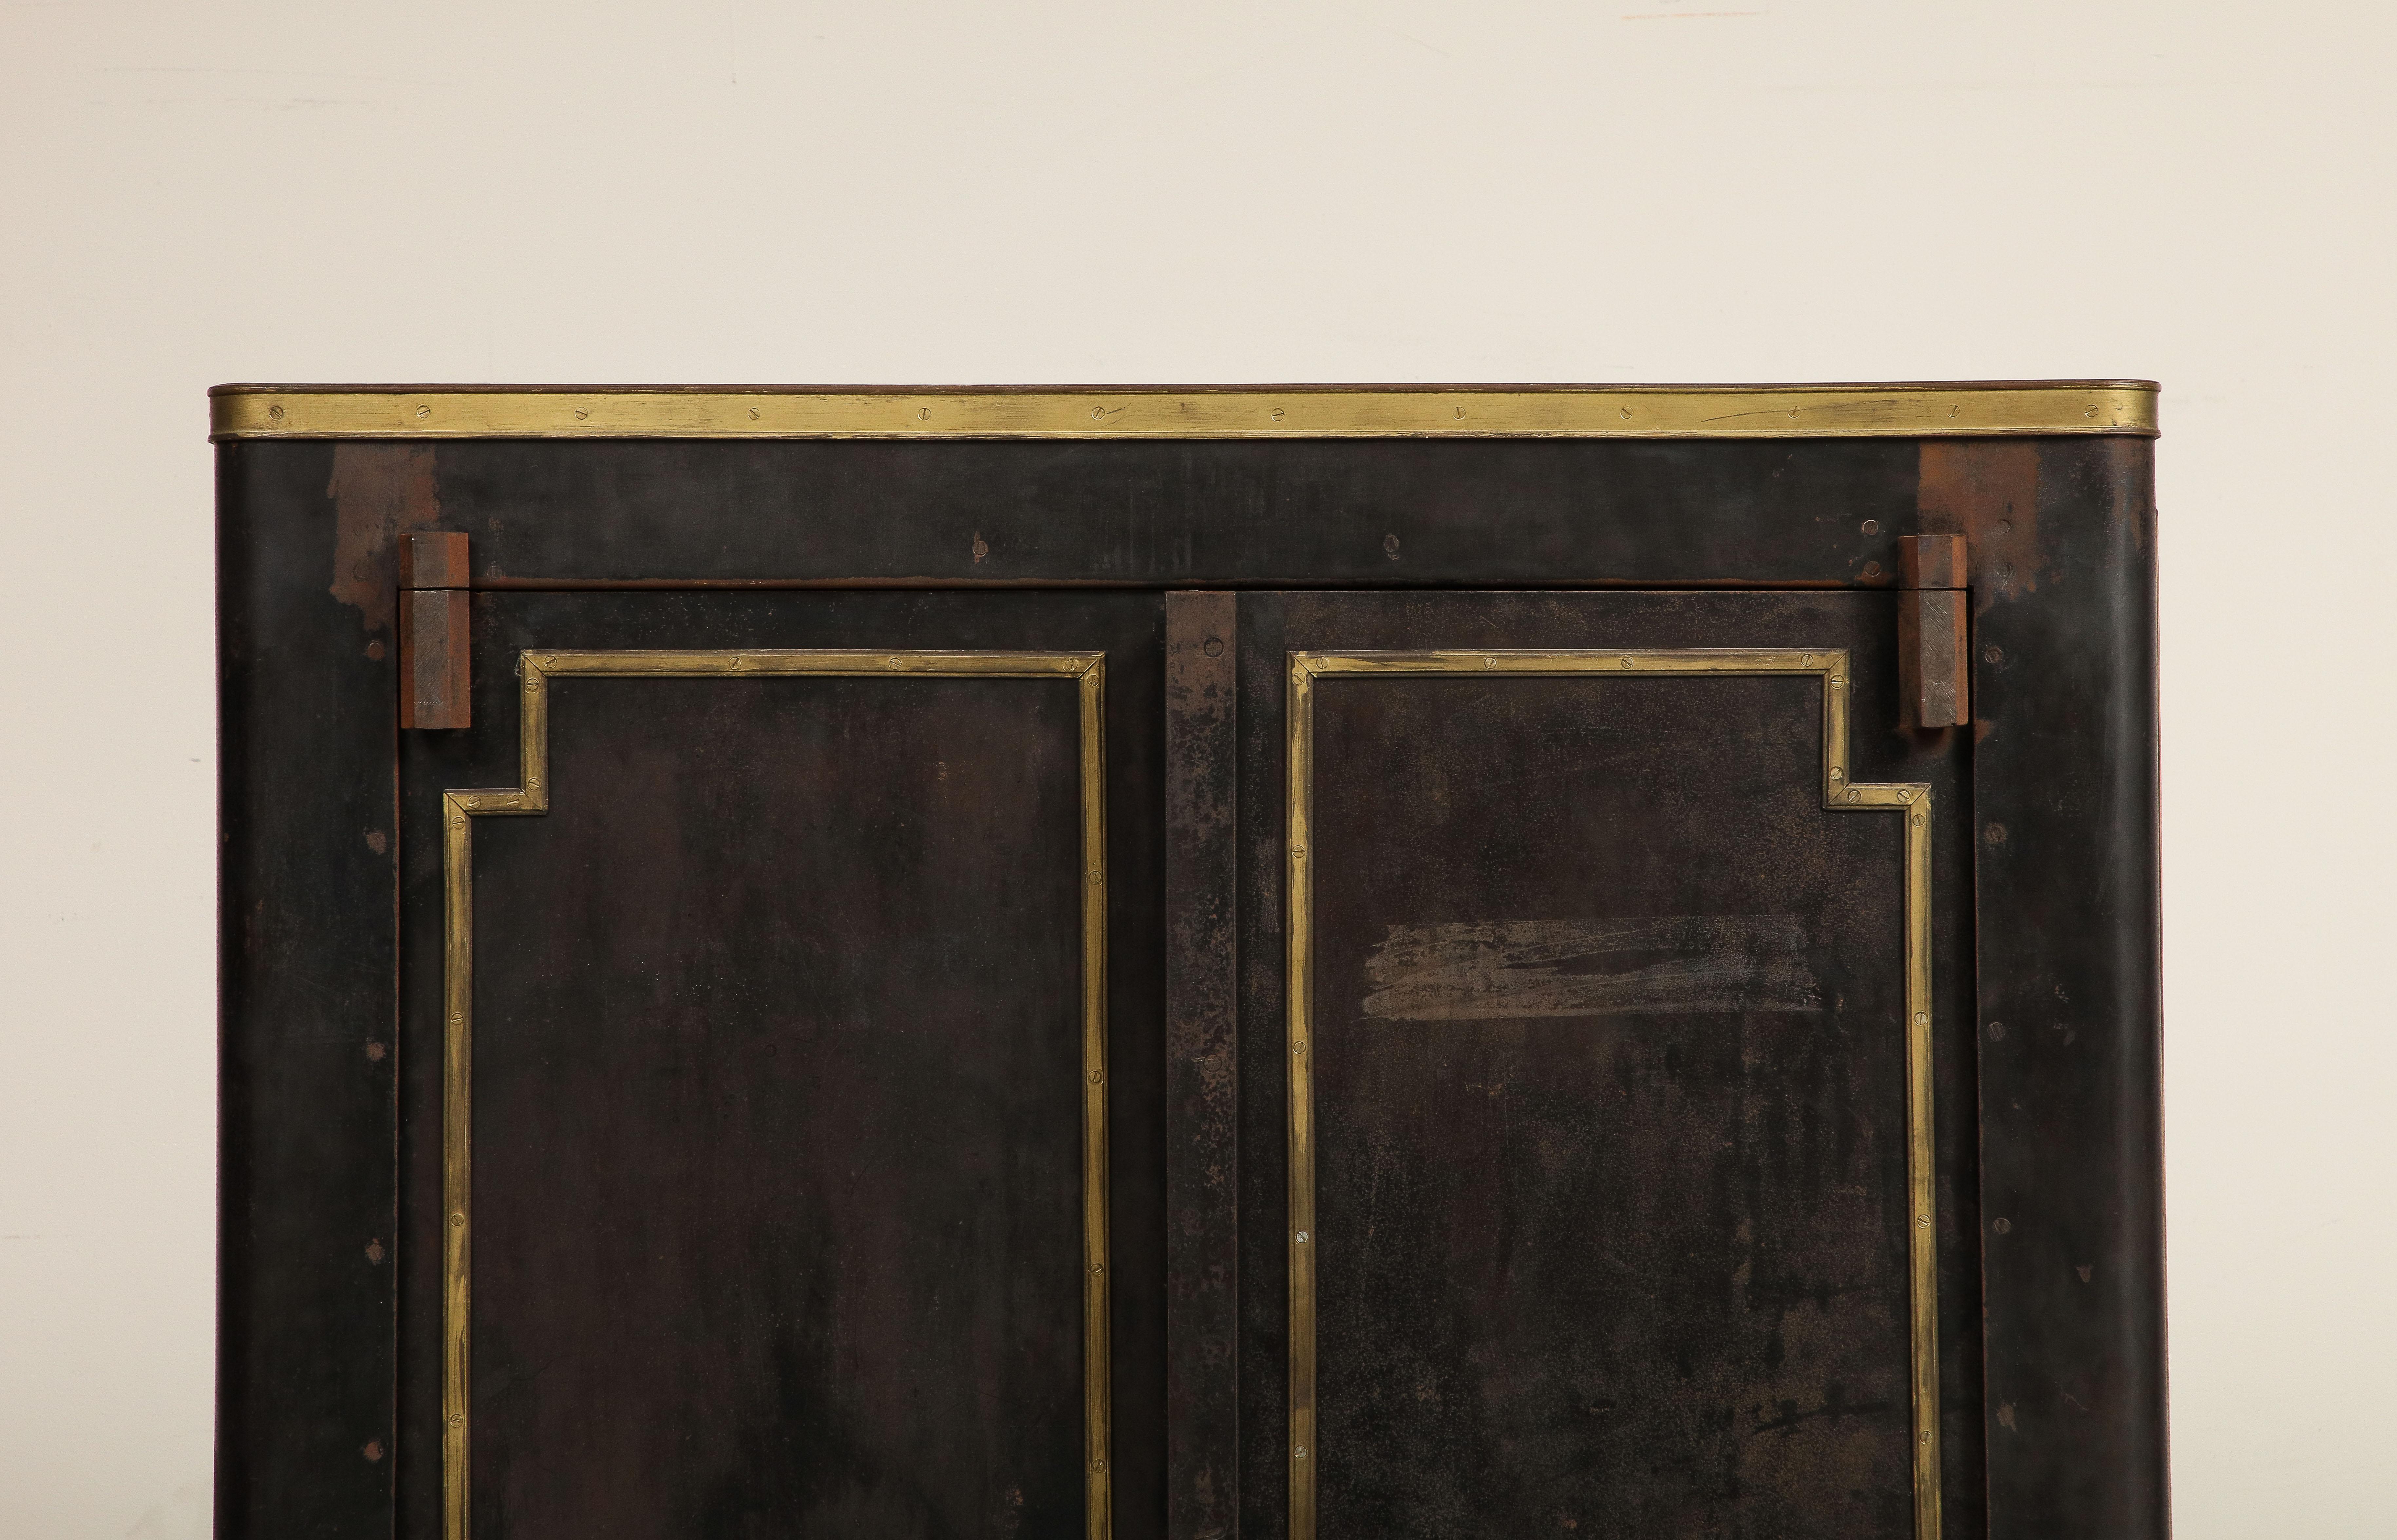 Impressive 20th century vintage French blackened metal cabinet or armoire with brass accents and a beautiful patina. Adjustable metal interior shelving. Condition as shown with rust/oxidation marks. 